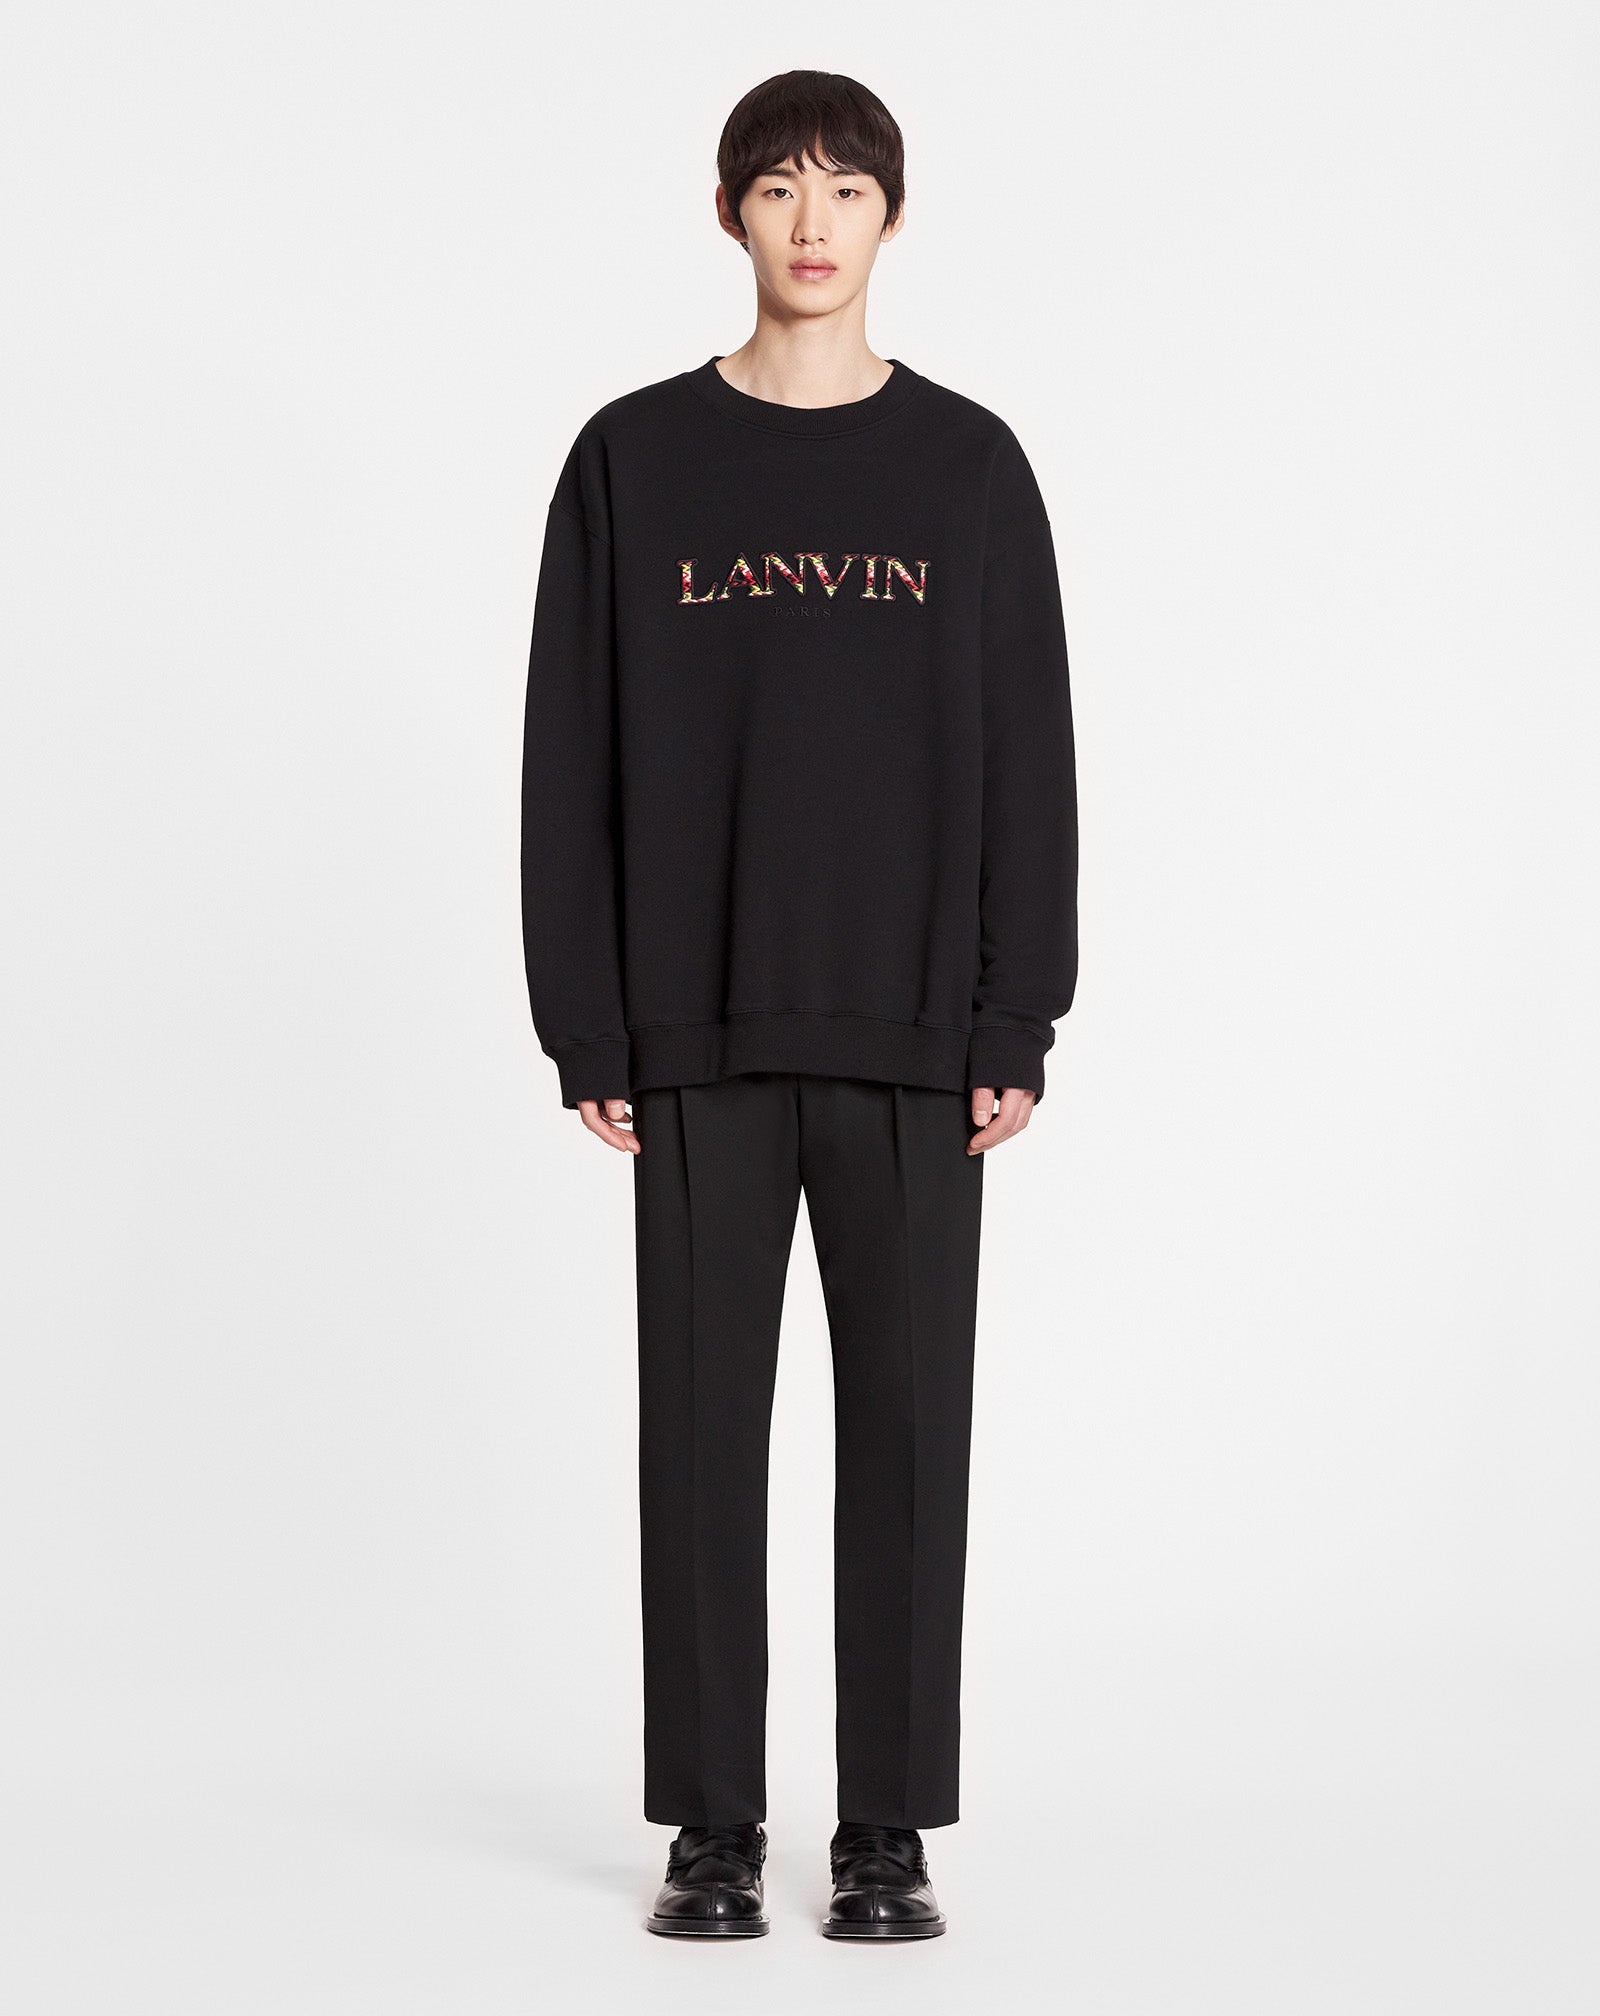 OVERSIZED EMBROIDERED LANVIN CURB SWEATSHIRT - 2